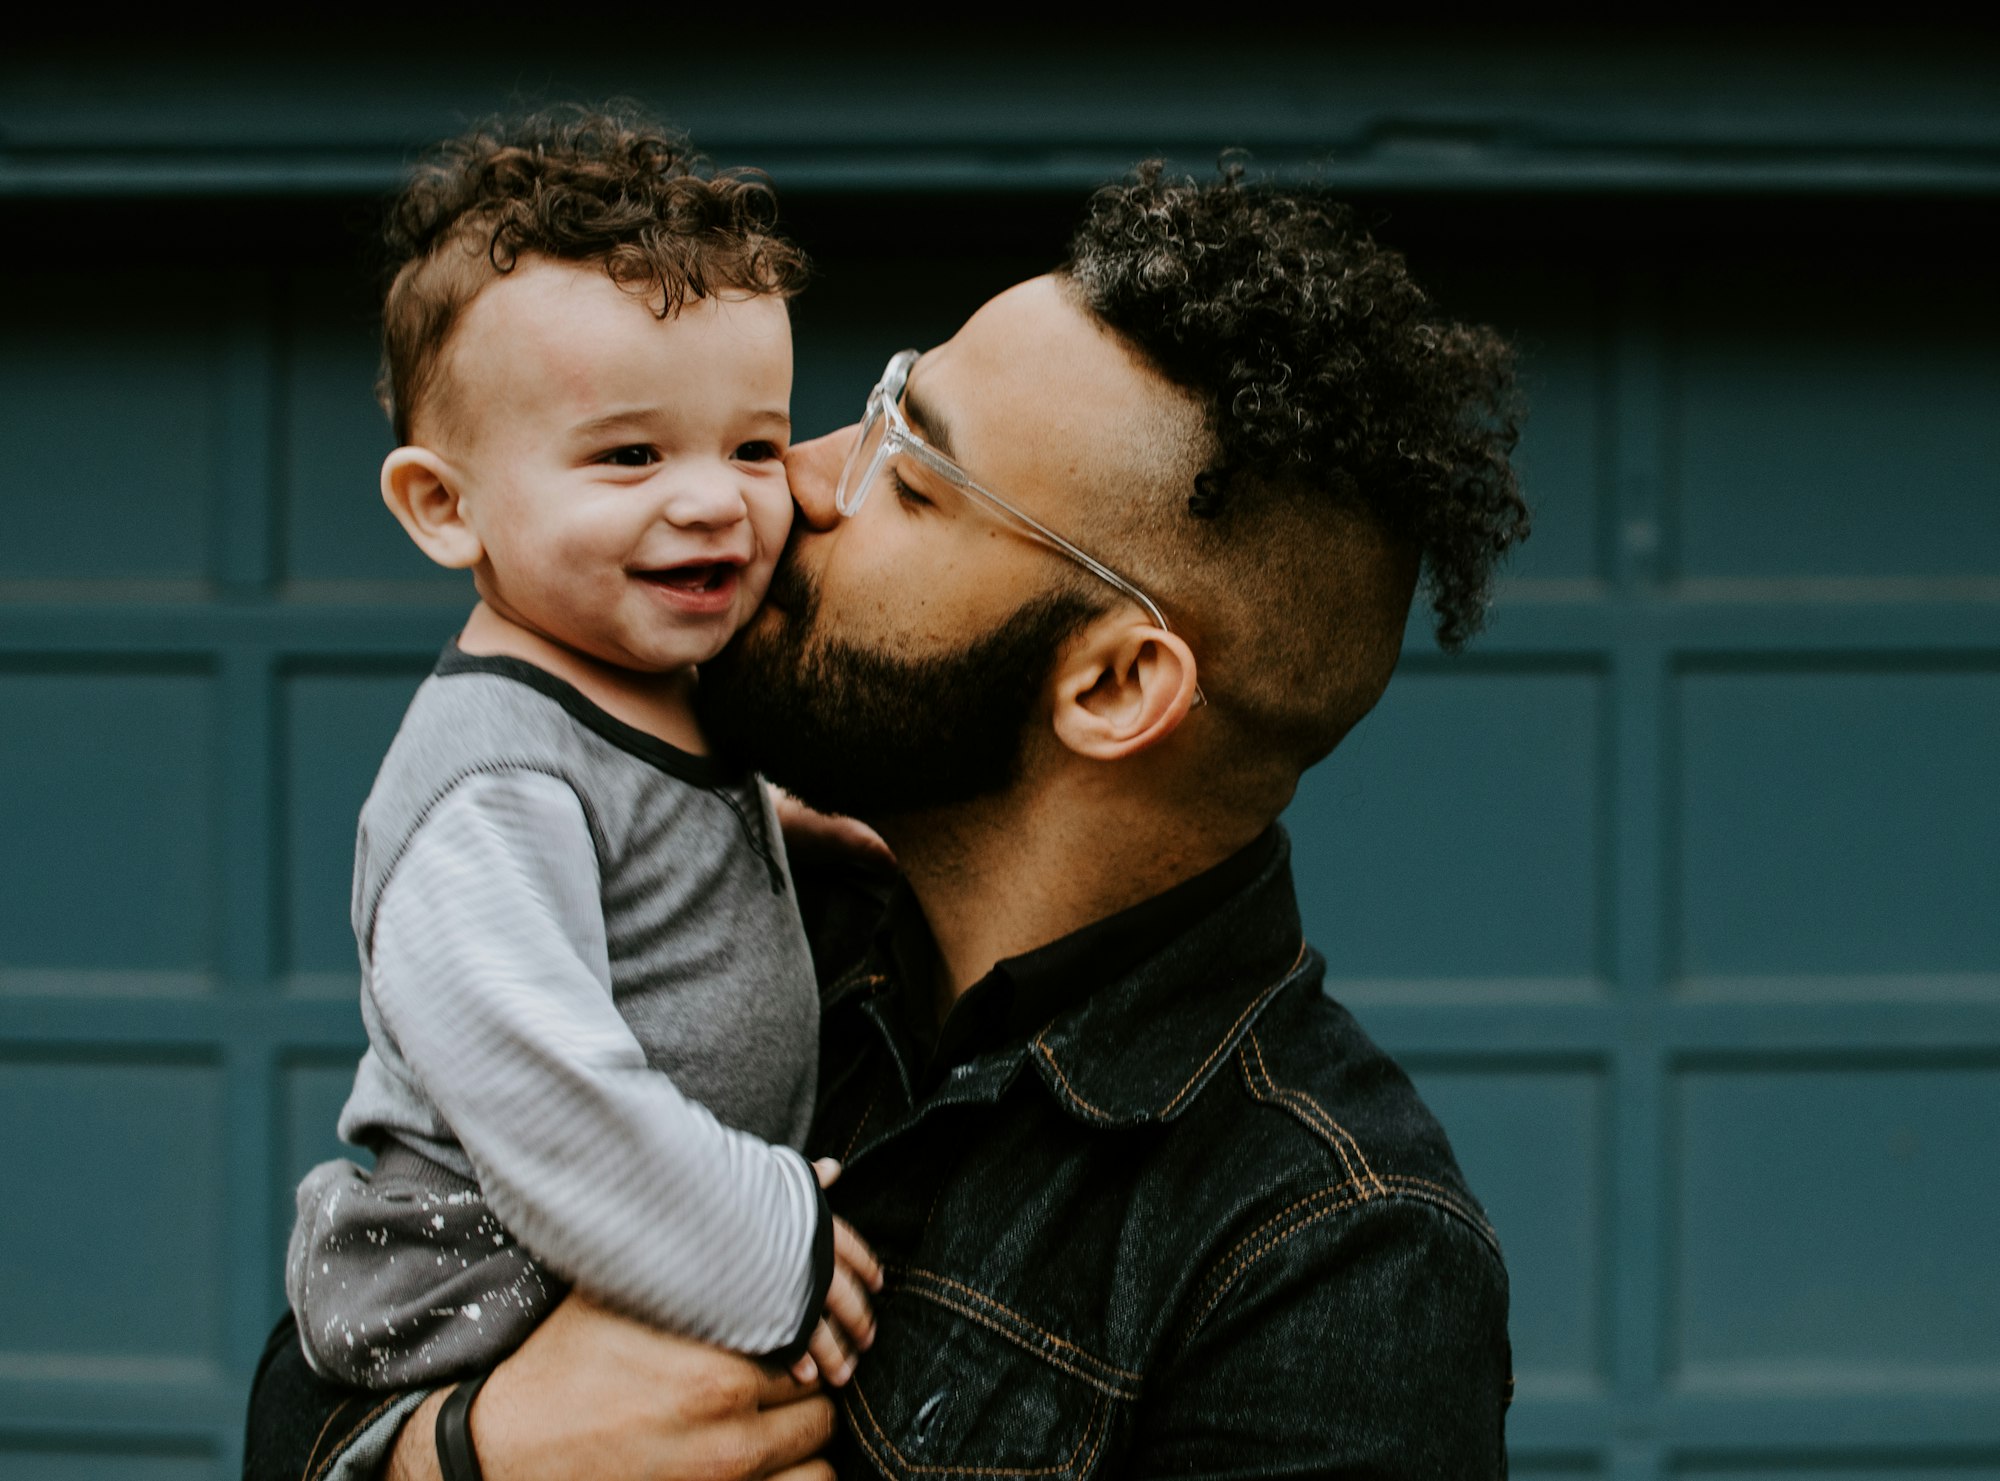 Top 8 Father's Day Gift Ideas to Help You Celebrate Your Dad